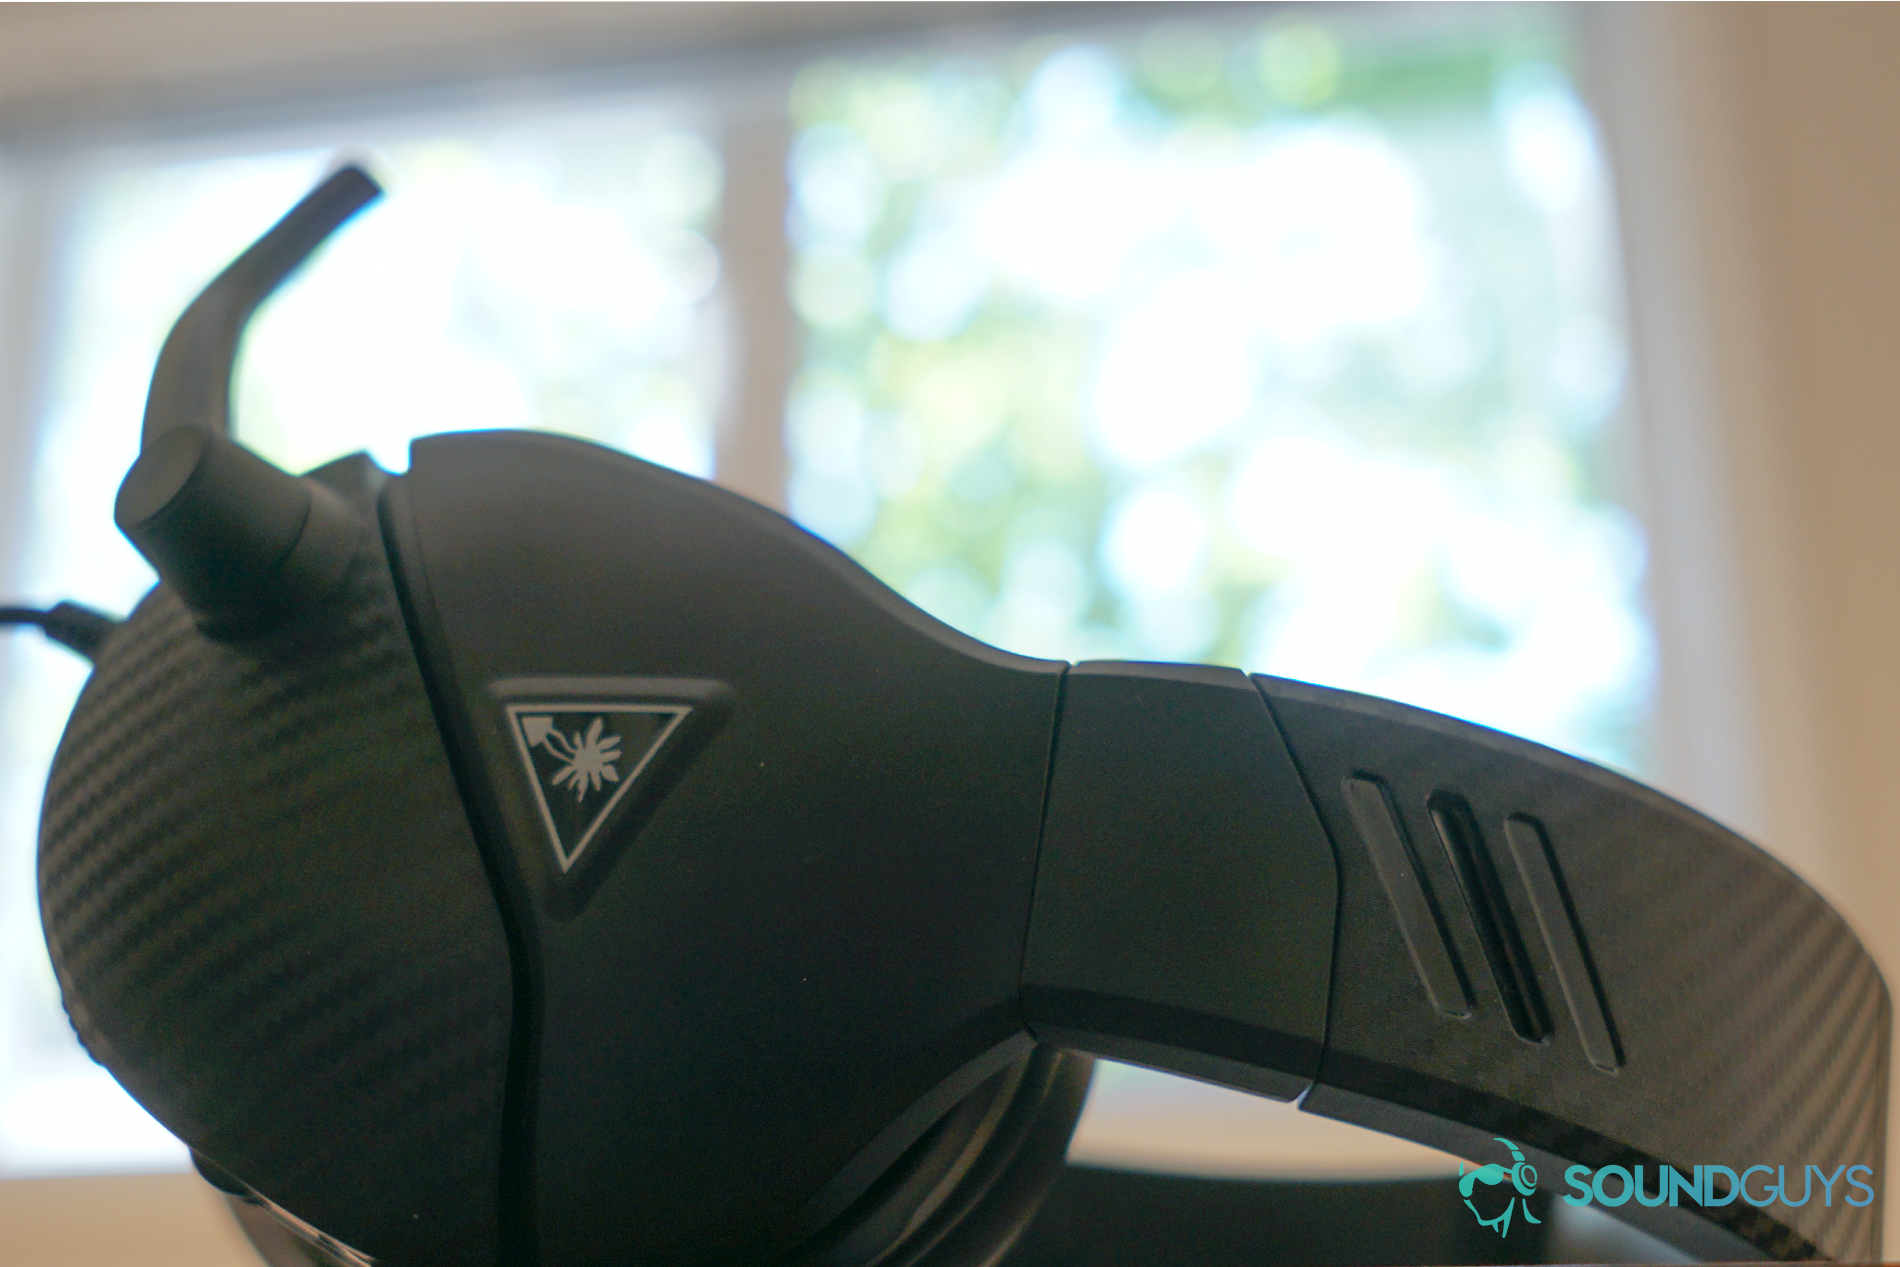 The Turtle Beach Recon 200 sits in front of a window